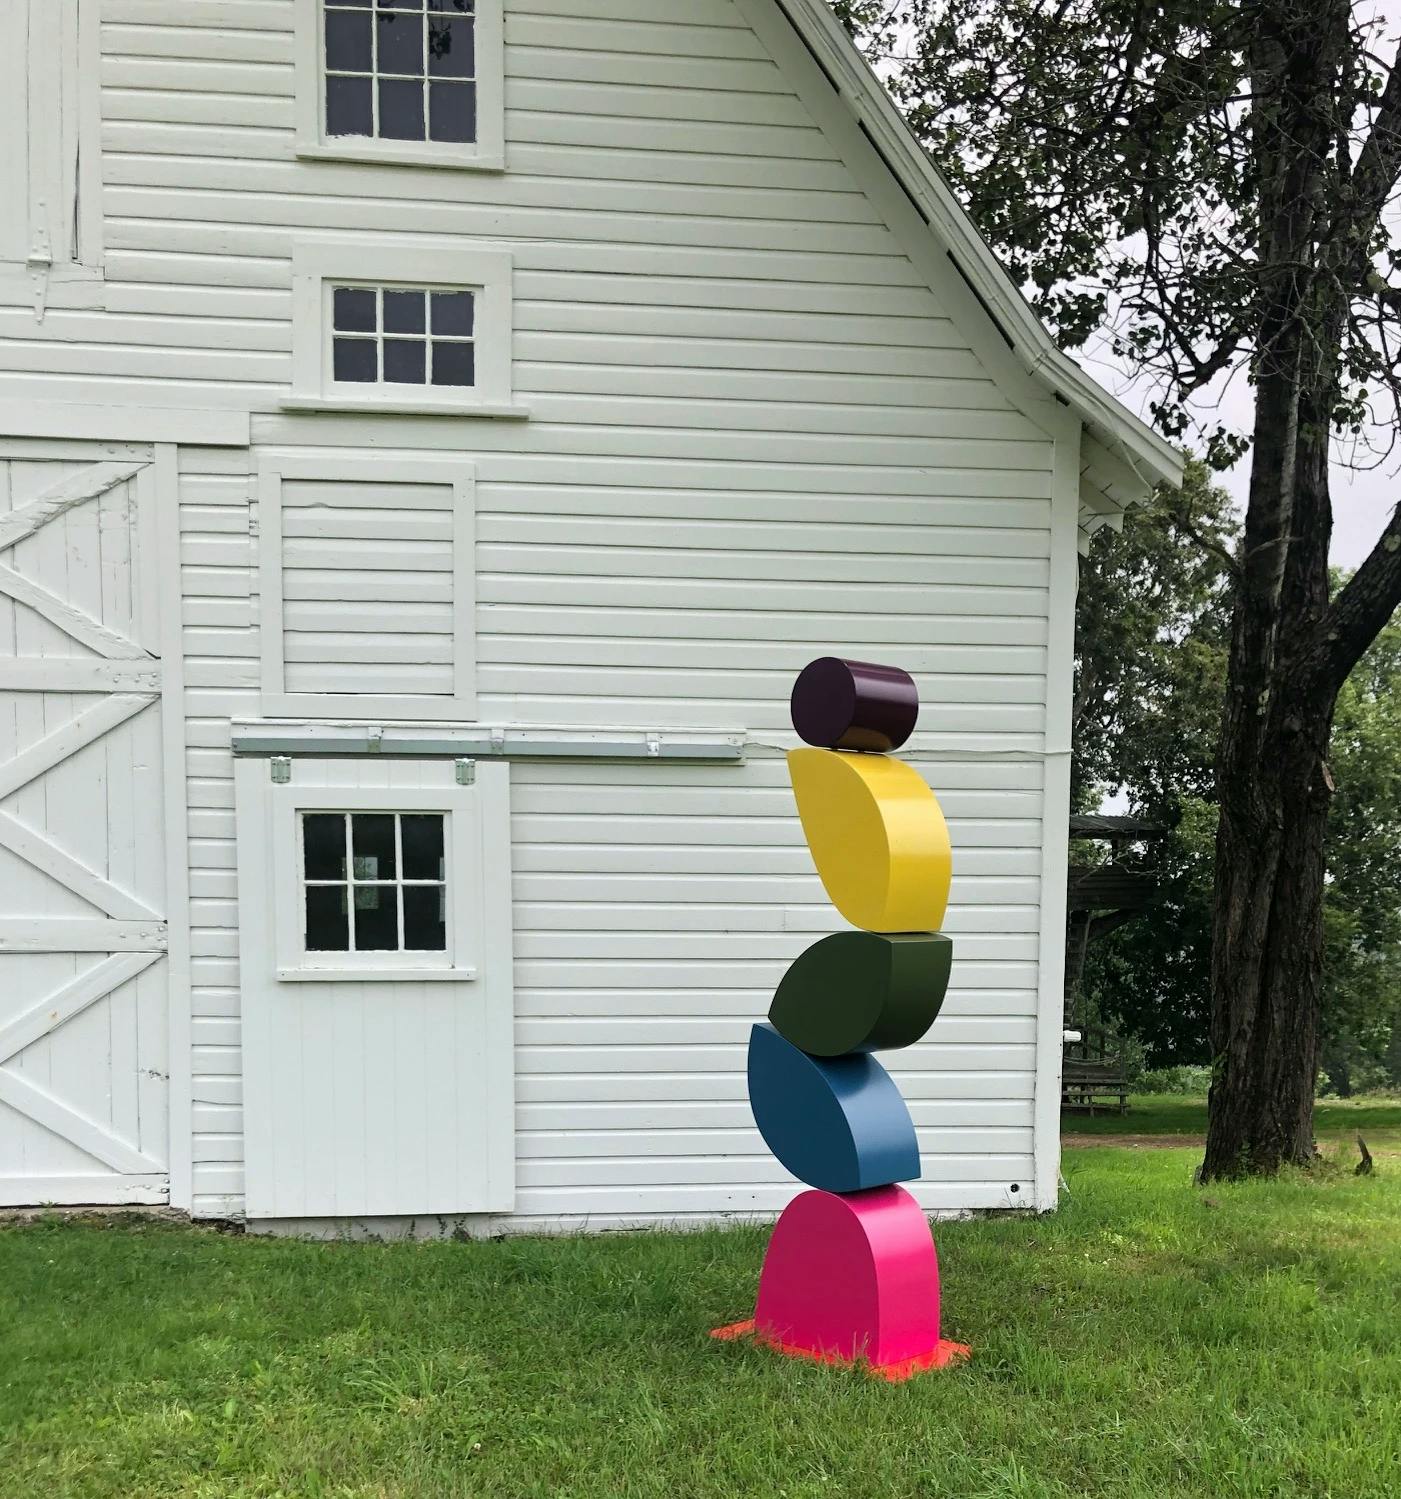 Oversized, aluminum sculpture by artist Vicki Sher outside in a grassy field next to a white barn.